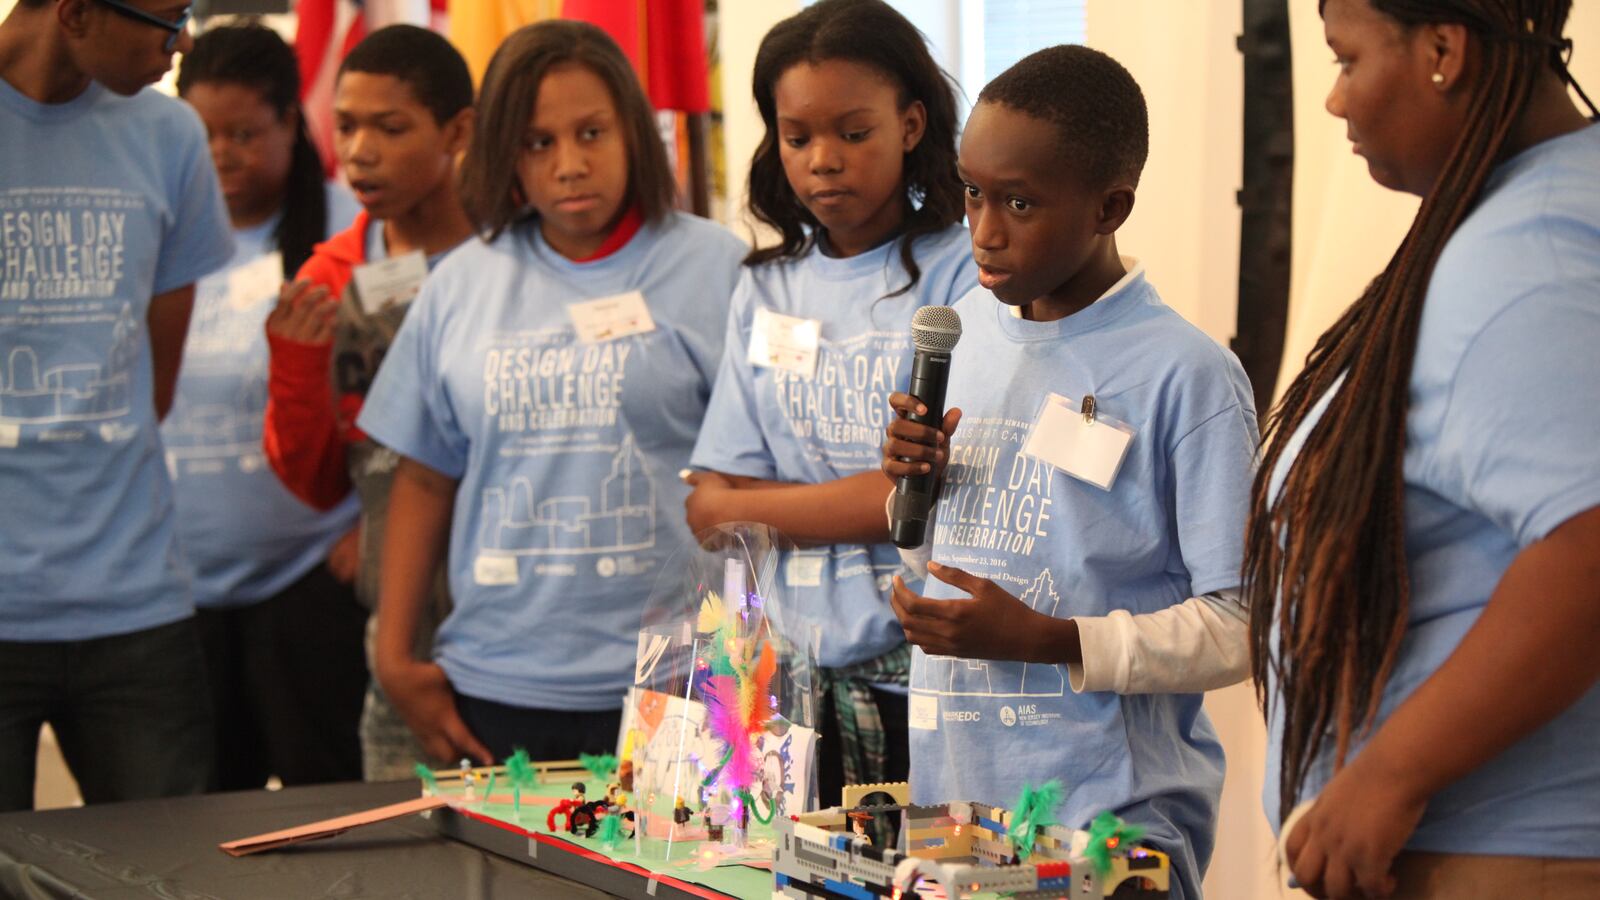 Schools That Can Newark tries to make learning relevant to students. In the fall, students came up with ideas for the redesign of a city park.